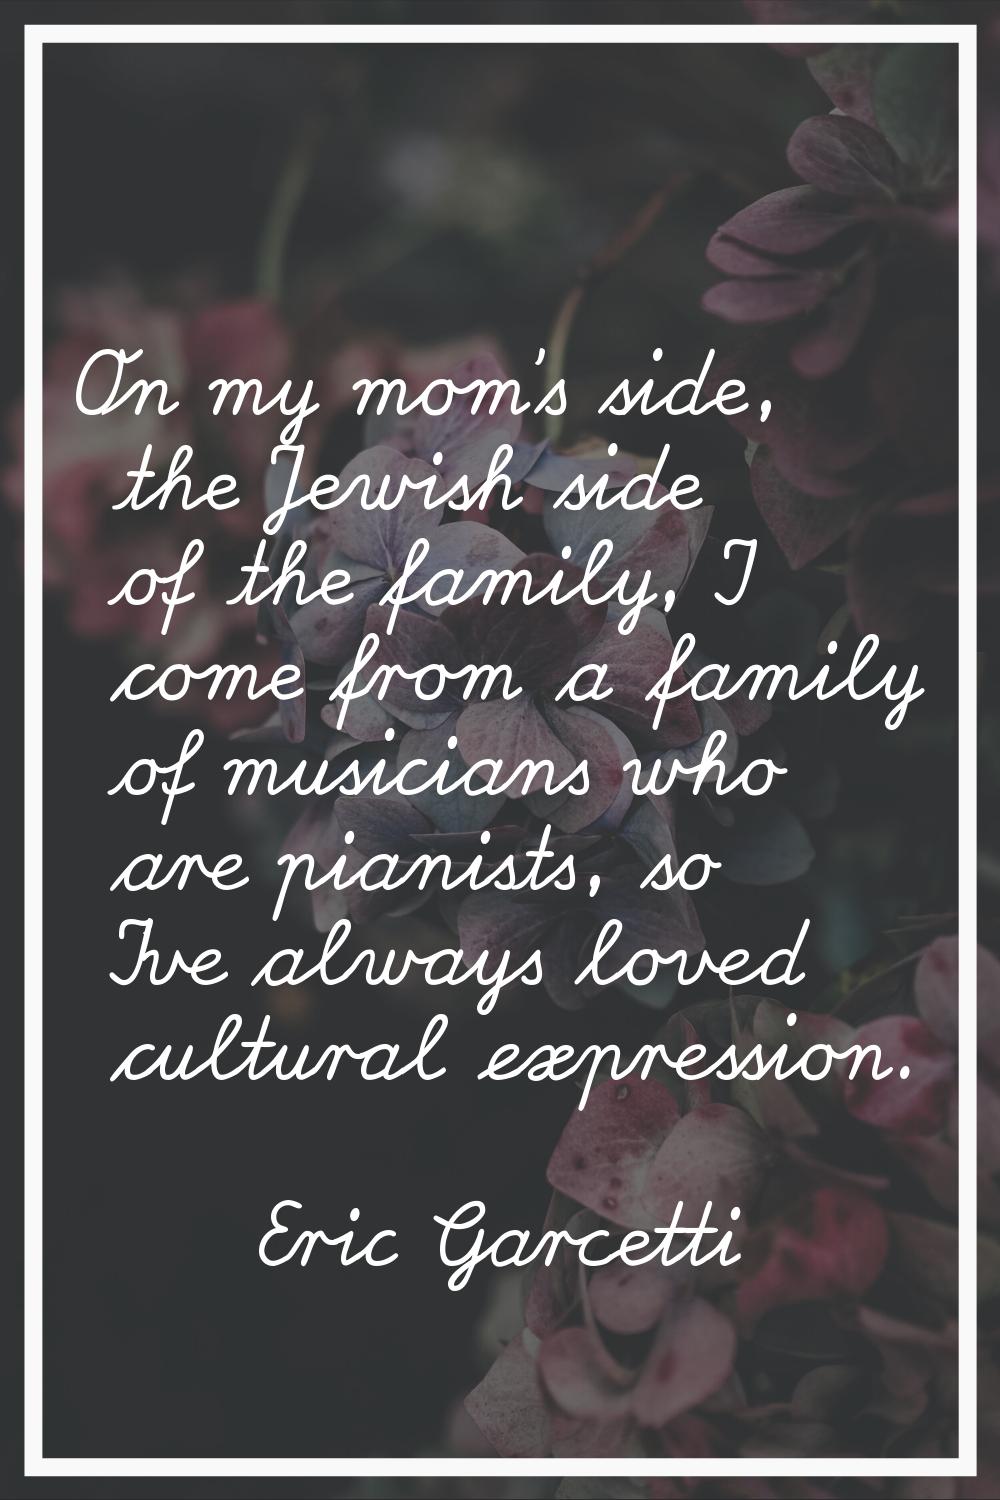 On my mom's side, the Jewish side of the family, I come from a family of musicians who are pianists